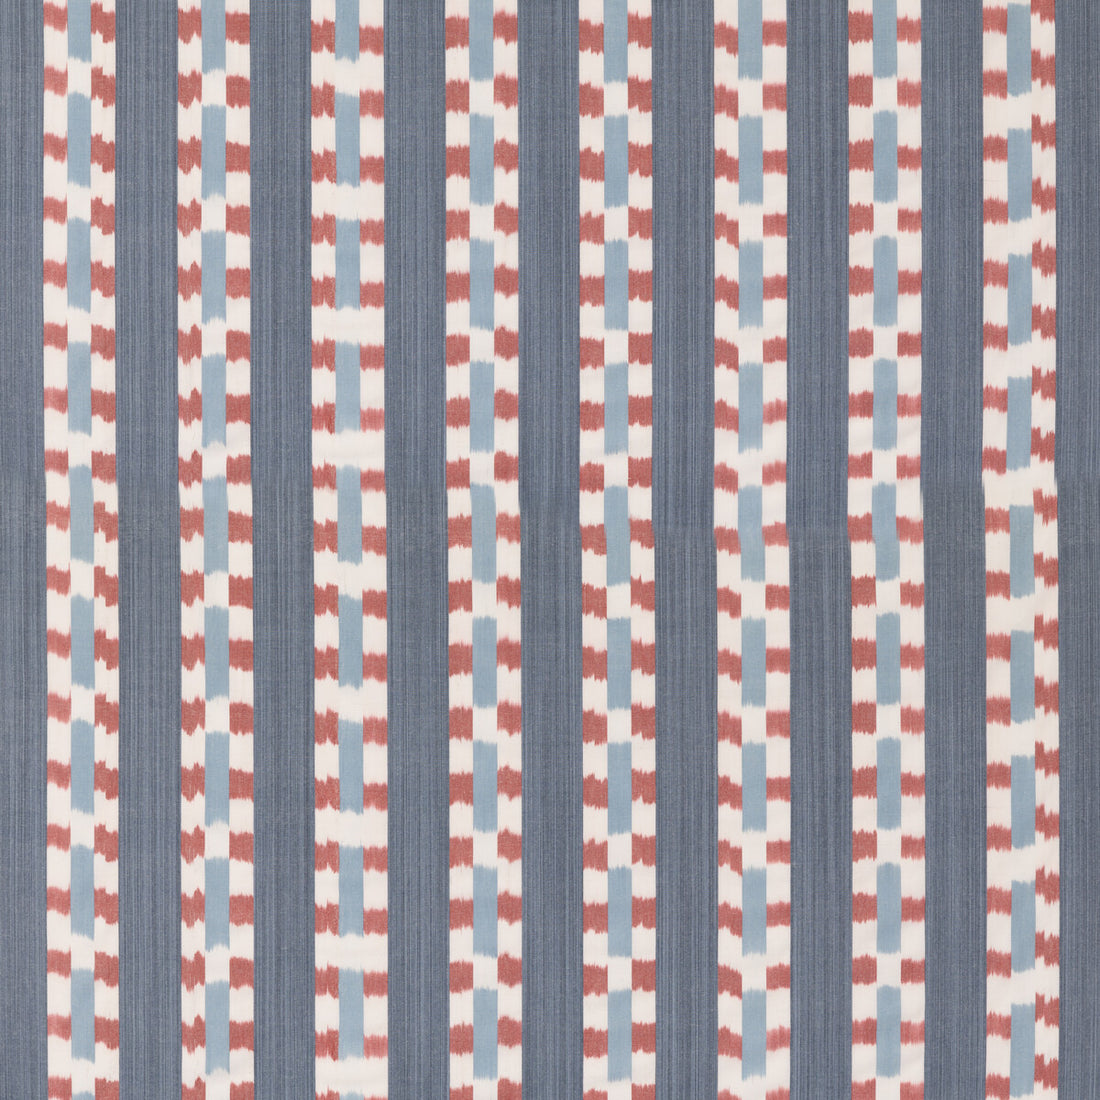 Wayfarer Stripe fabric in blue/red color - pattern FD822.G103.0 - by Mulberry in the Westerly Stripes collection